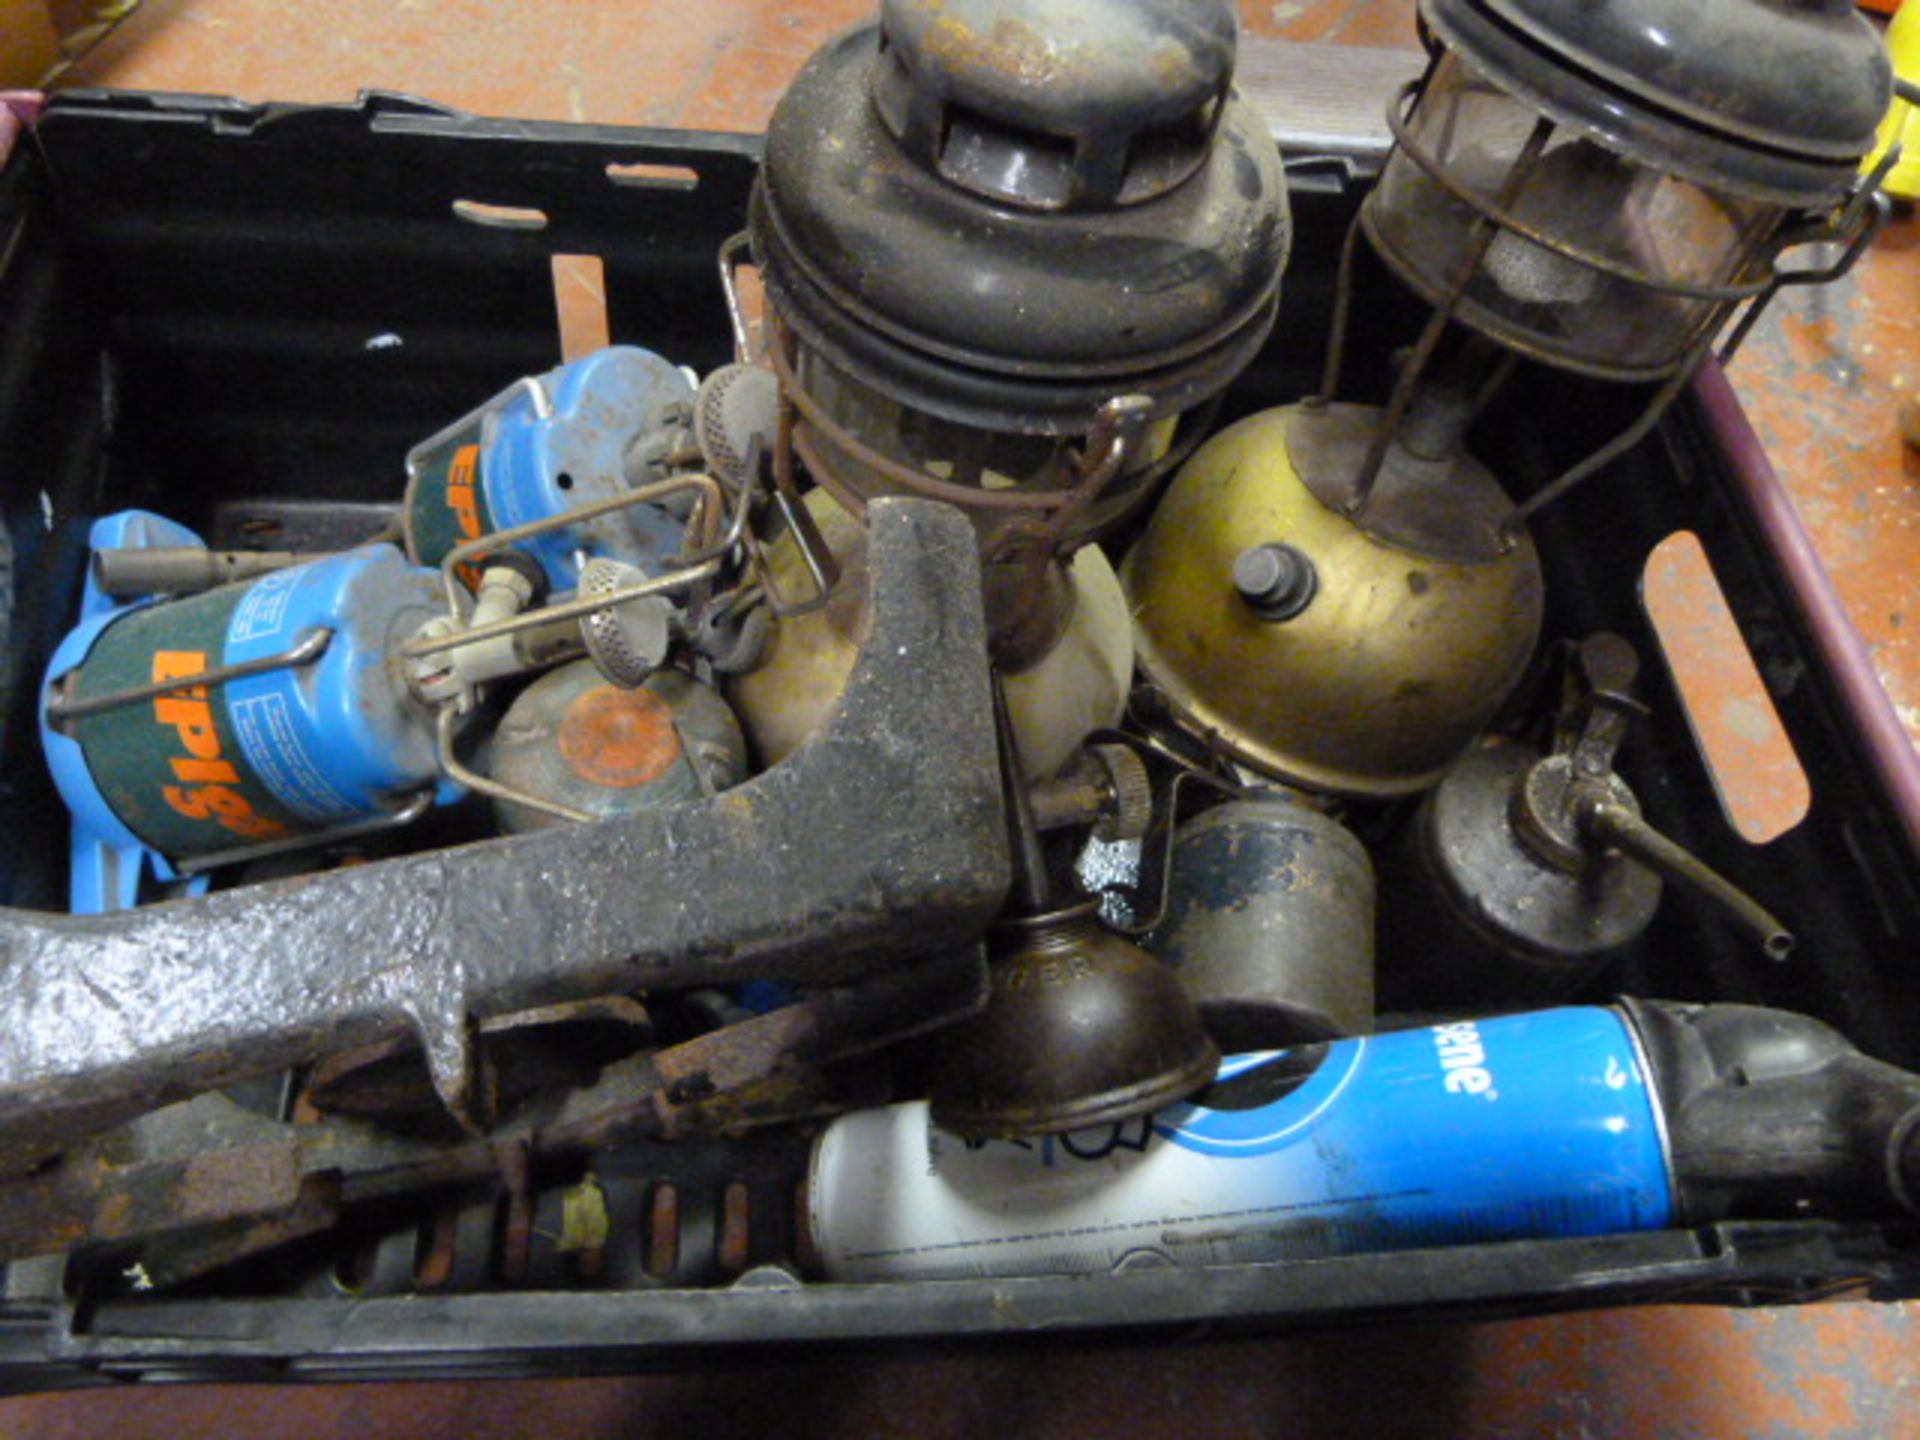 Box of Tilley Lamps, Camping Gas Burners, Oil Cans